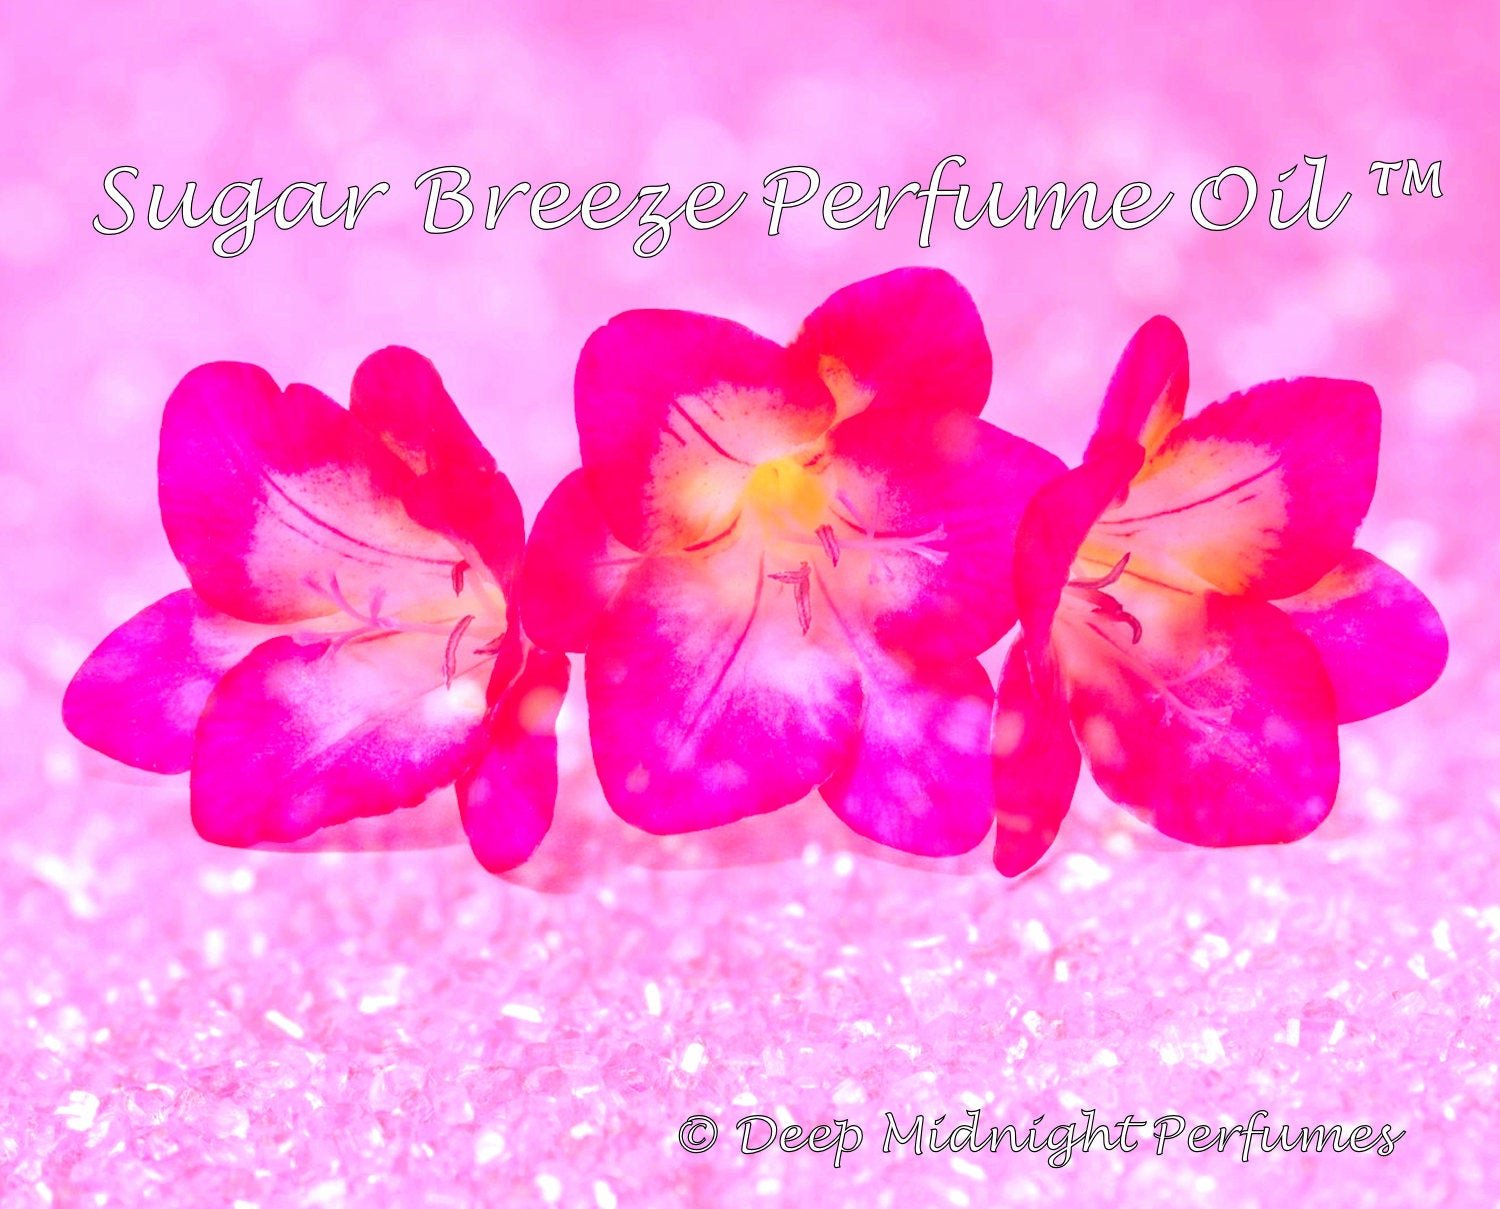 SUGAR BREEZE™ Perfume Oil - Sugar Crystals, Sugared White Amber, Freesia Flowers, Sparkling Water, Ginger - Sweet Floral Perfume